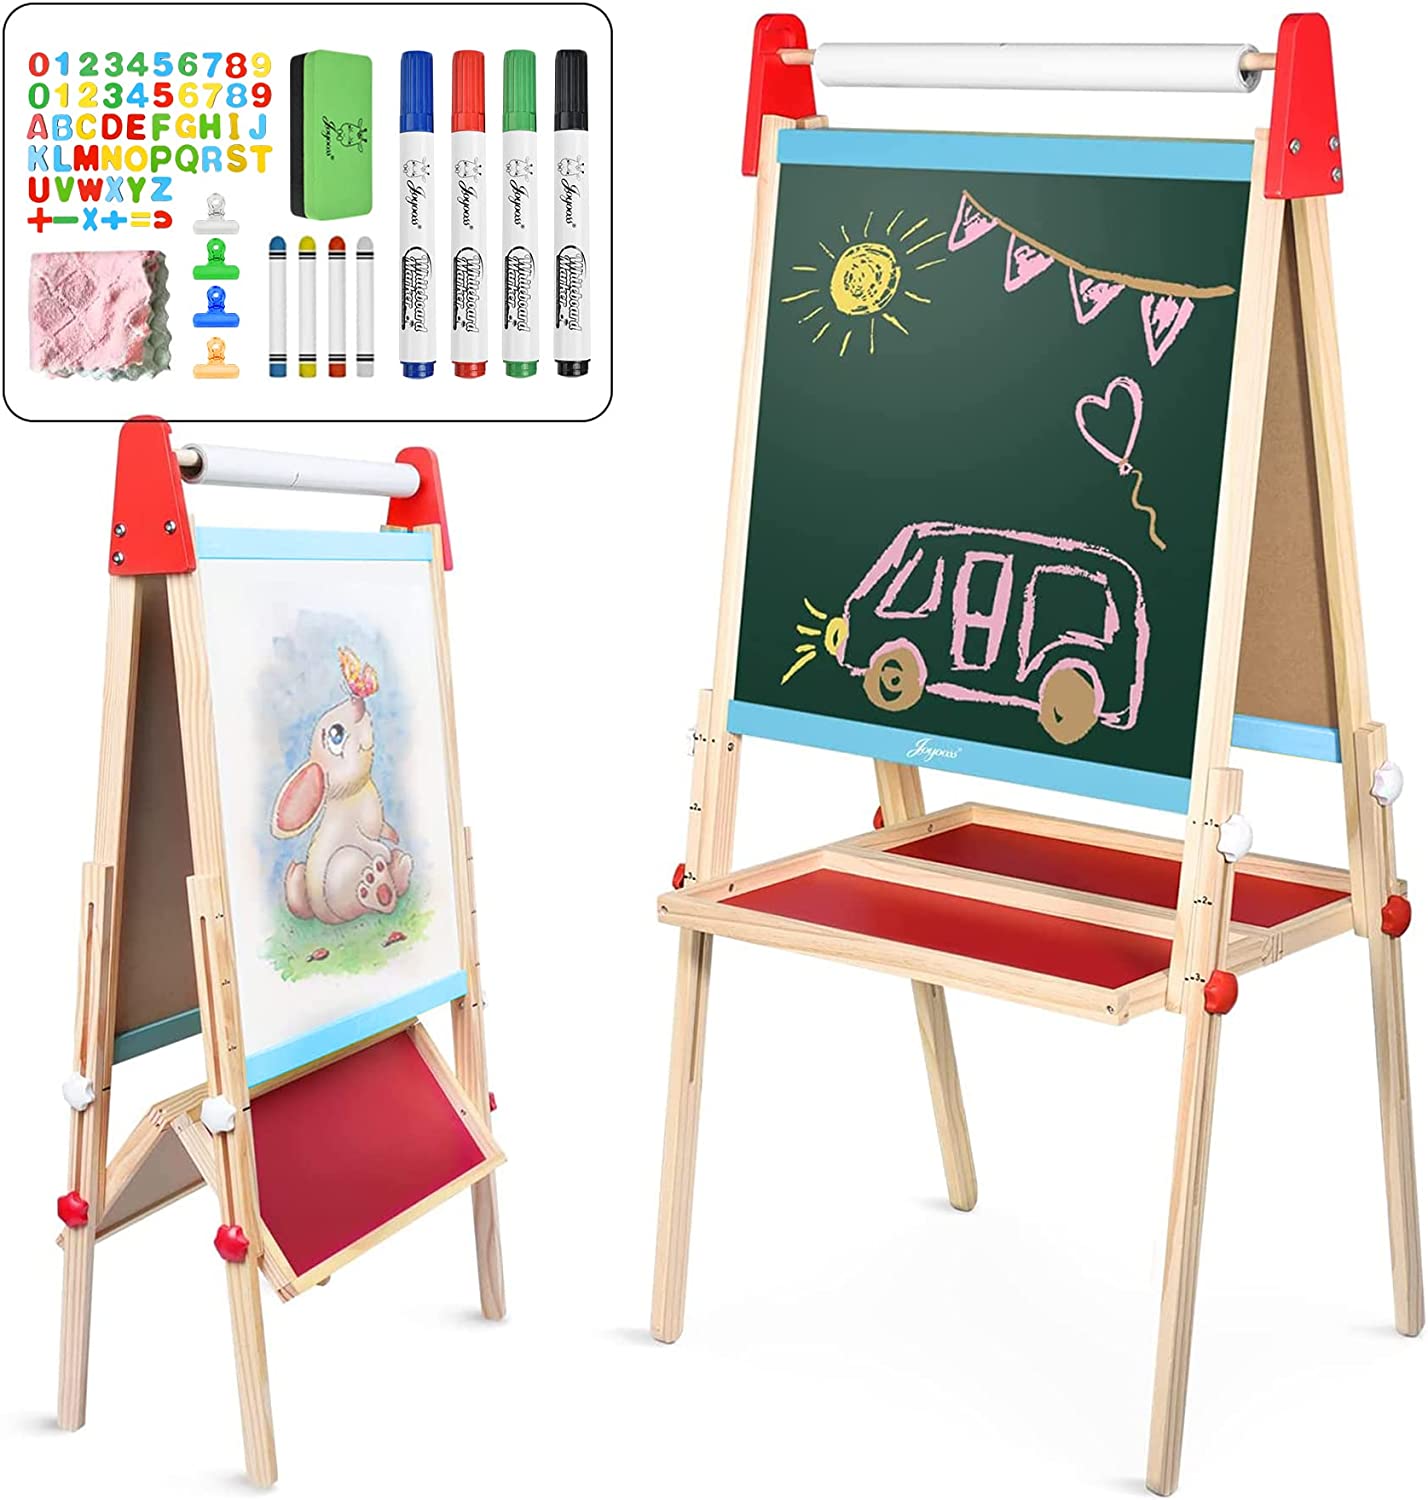 Joyooss Easel for Kids, Wooden Whiteboard & Chalkboard Easel, Foldable Height Adjustable Double Sided Art Easel for Toddlers with Paper Roll, Magnetic Letters, Marker